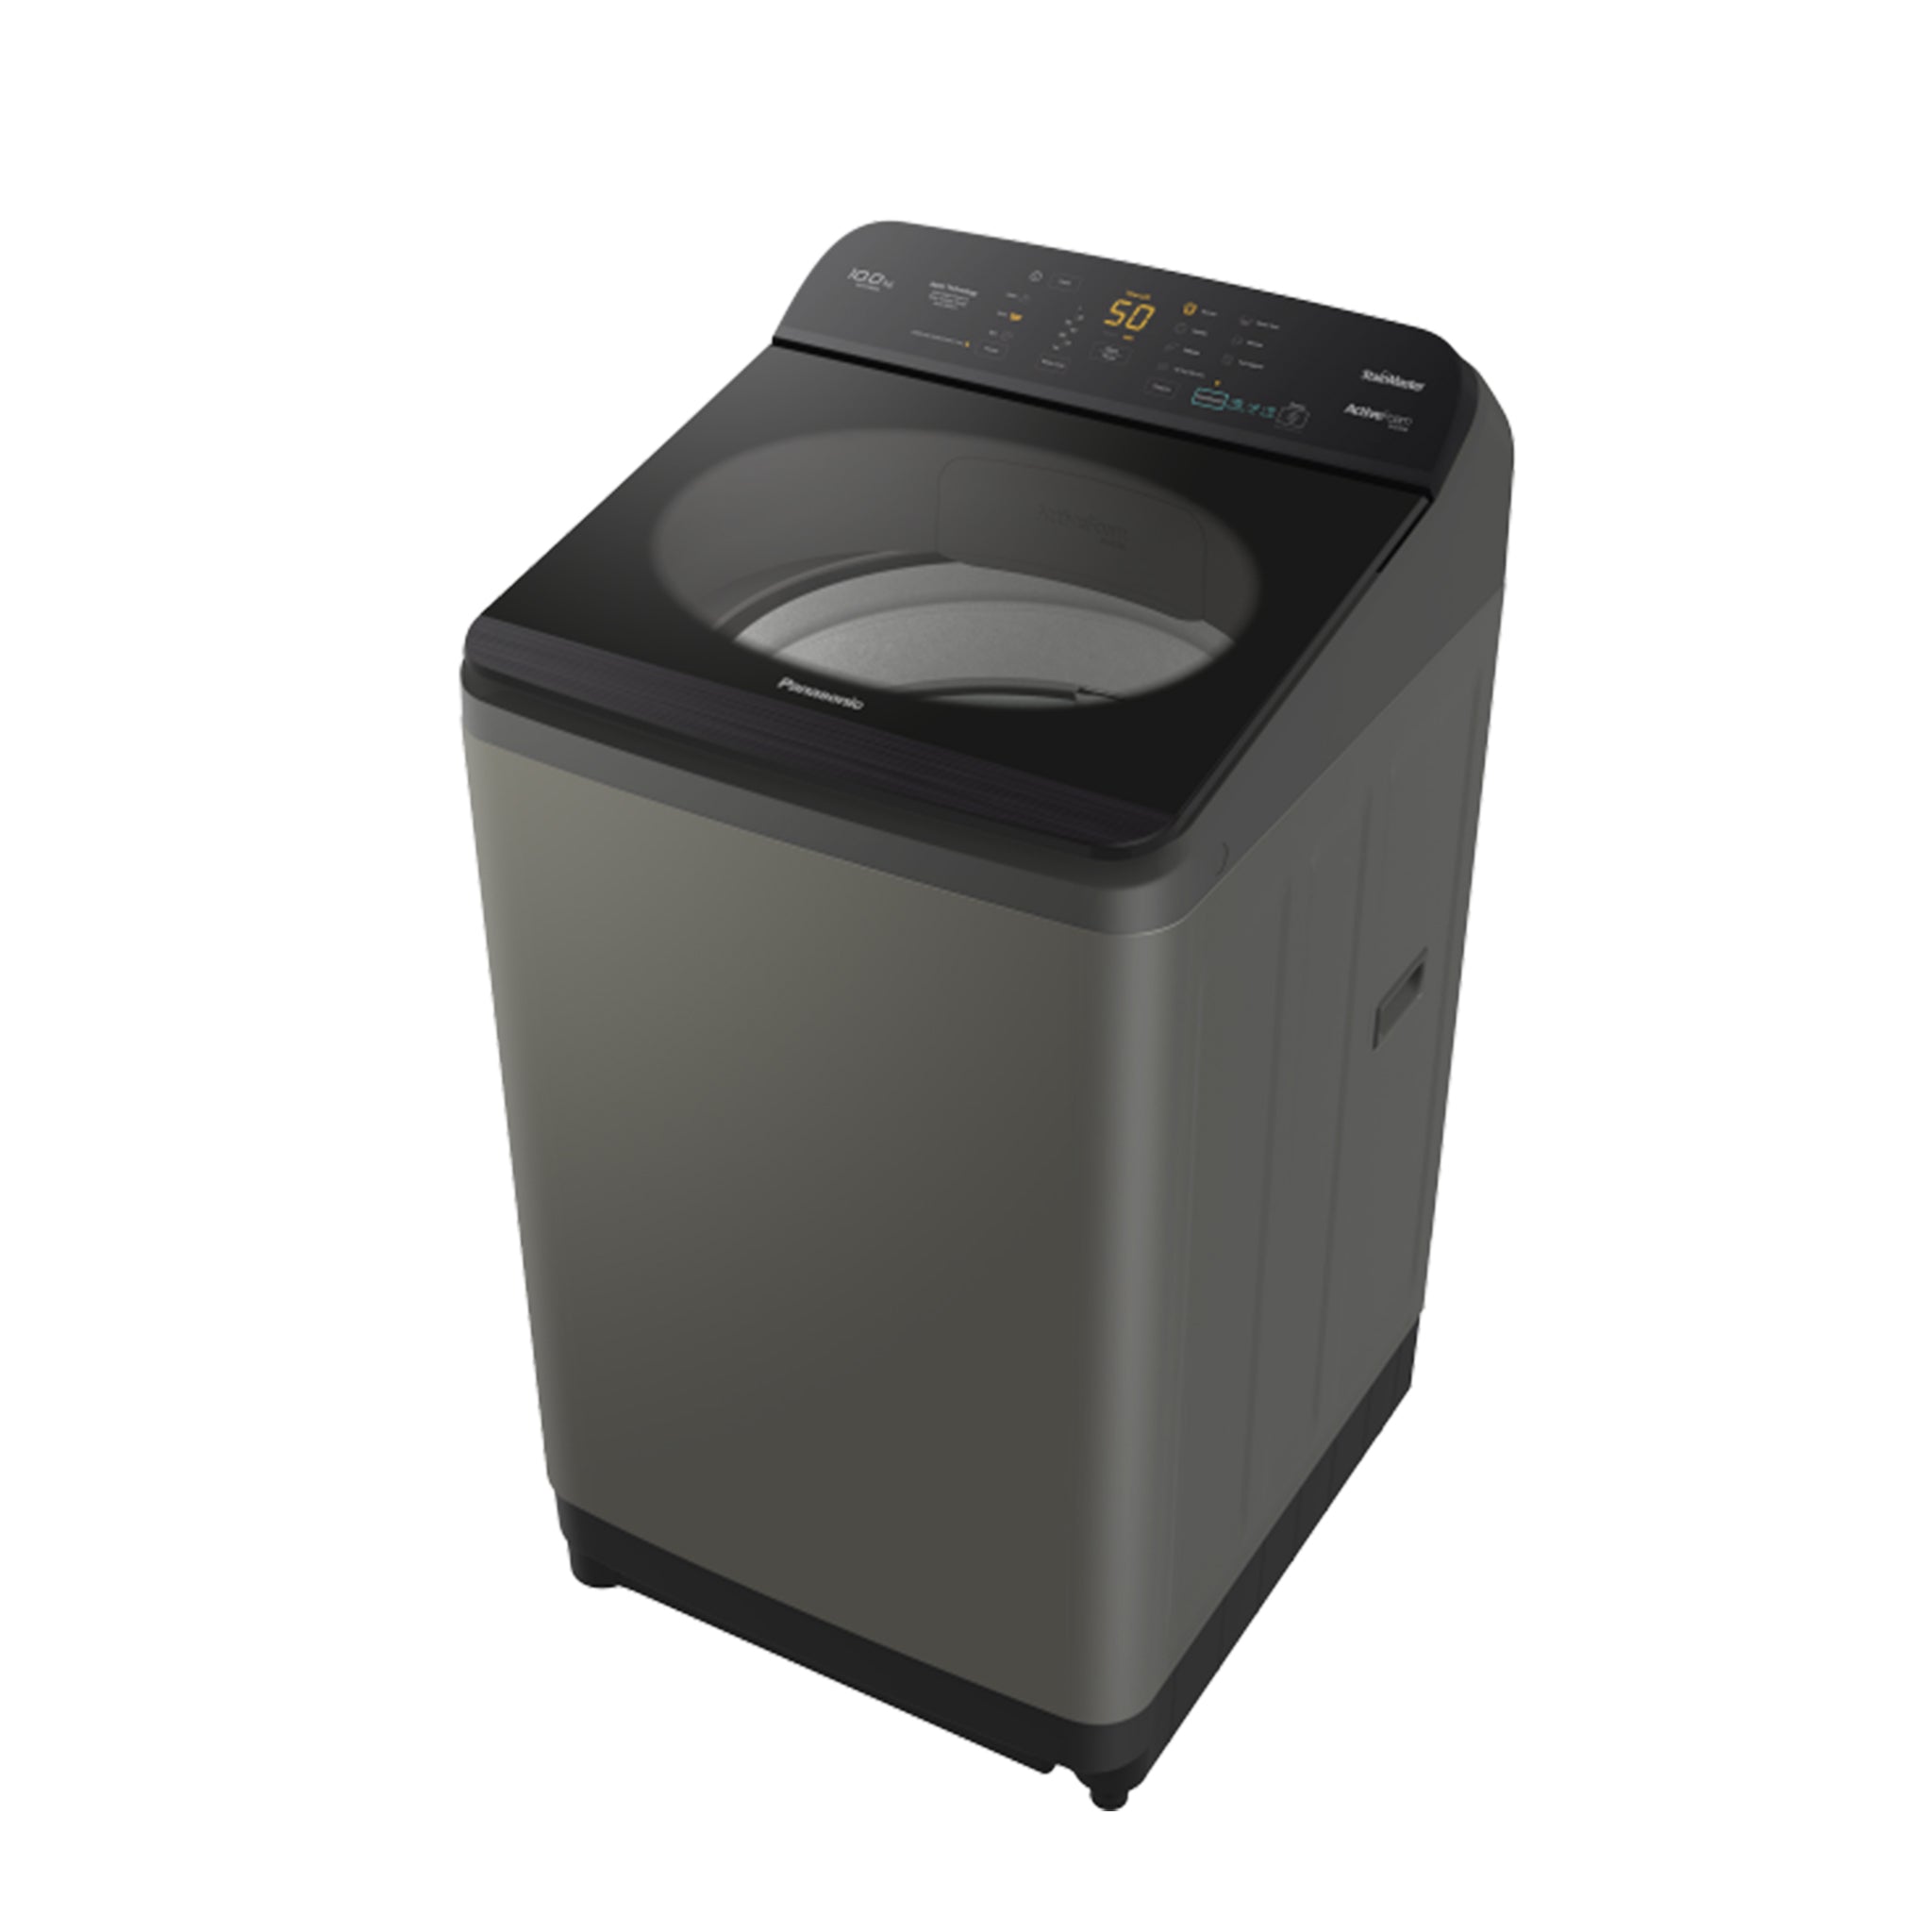 PANASONIC 10KG NA-F100A9DRM for Stain Care Top Load Washing Machine Panasonic